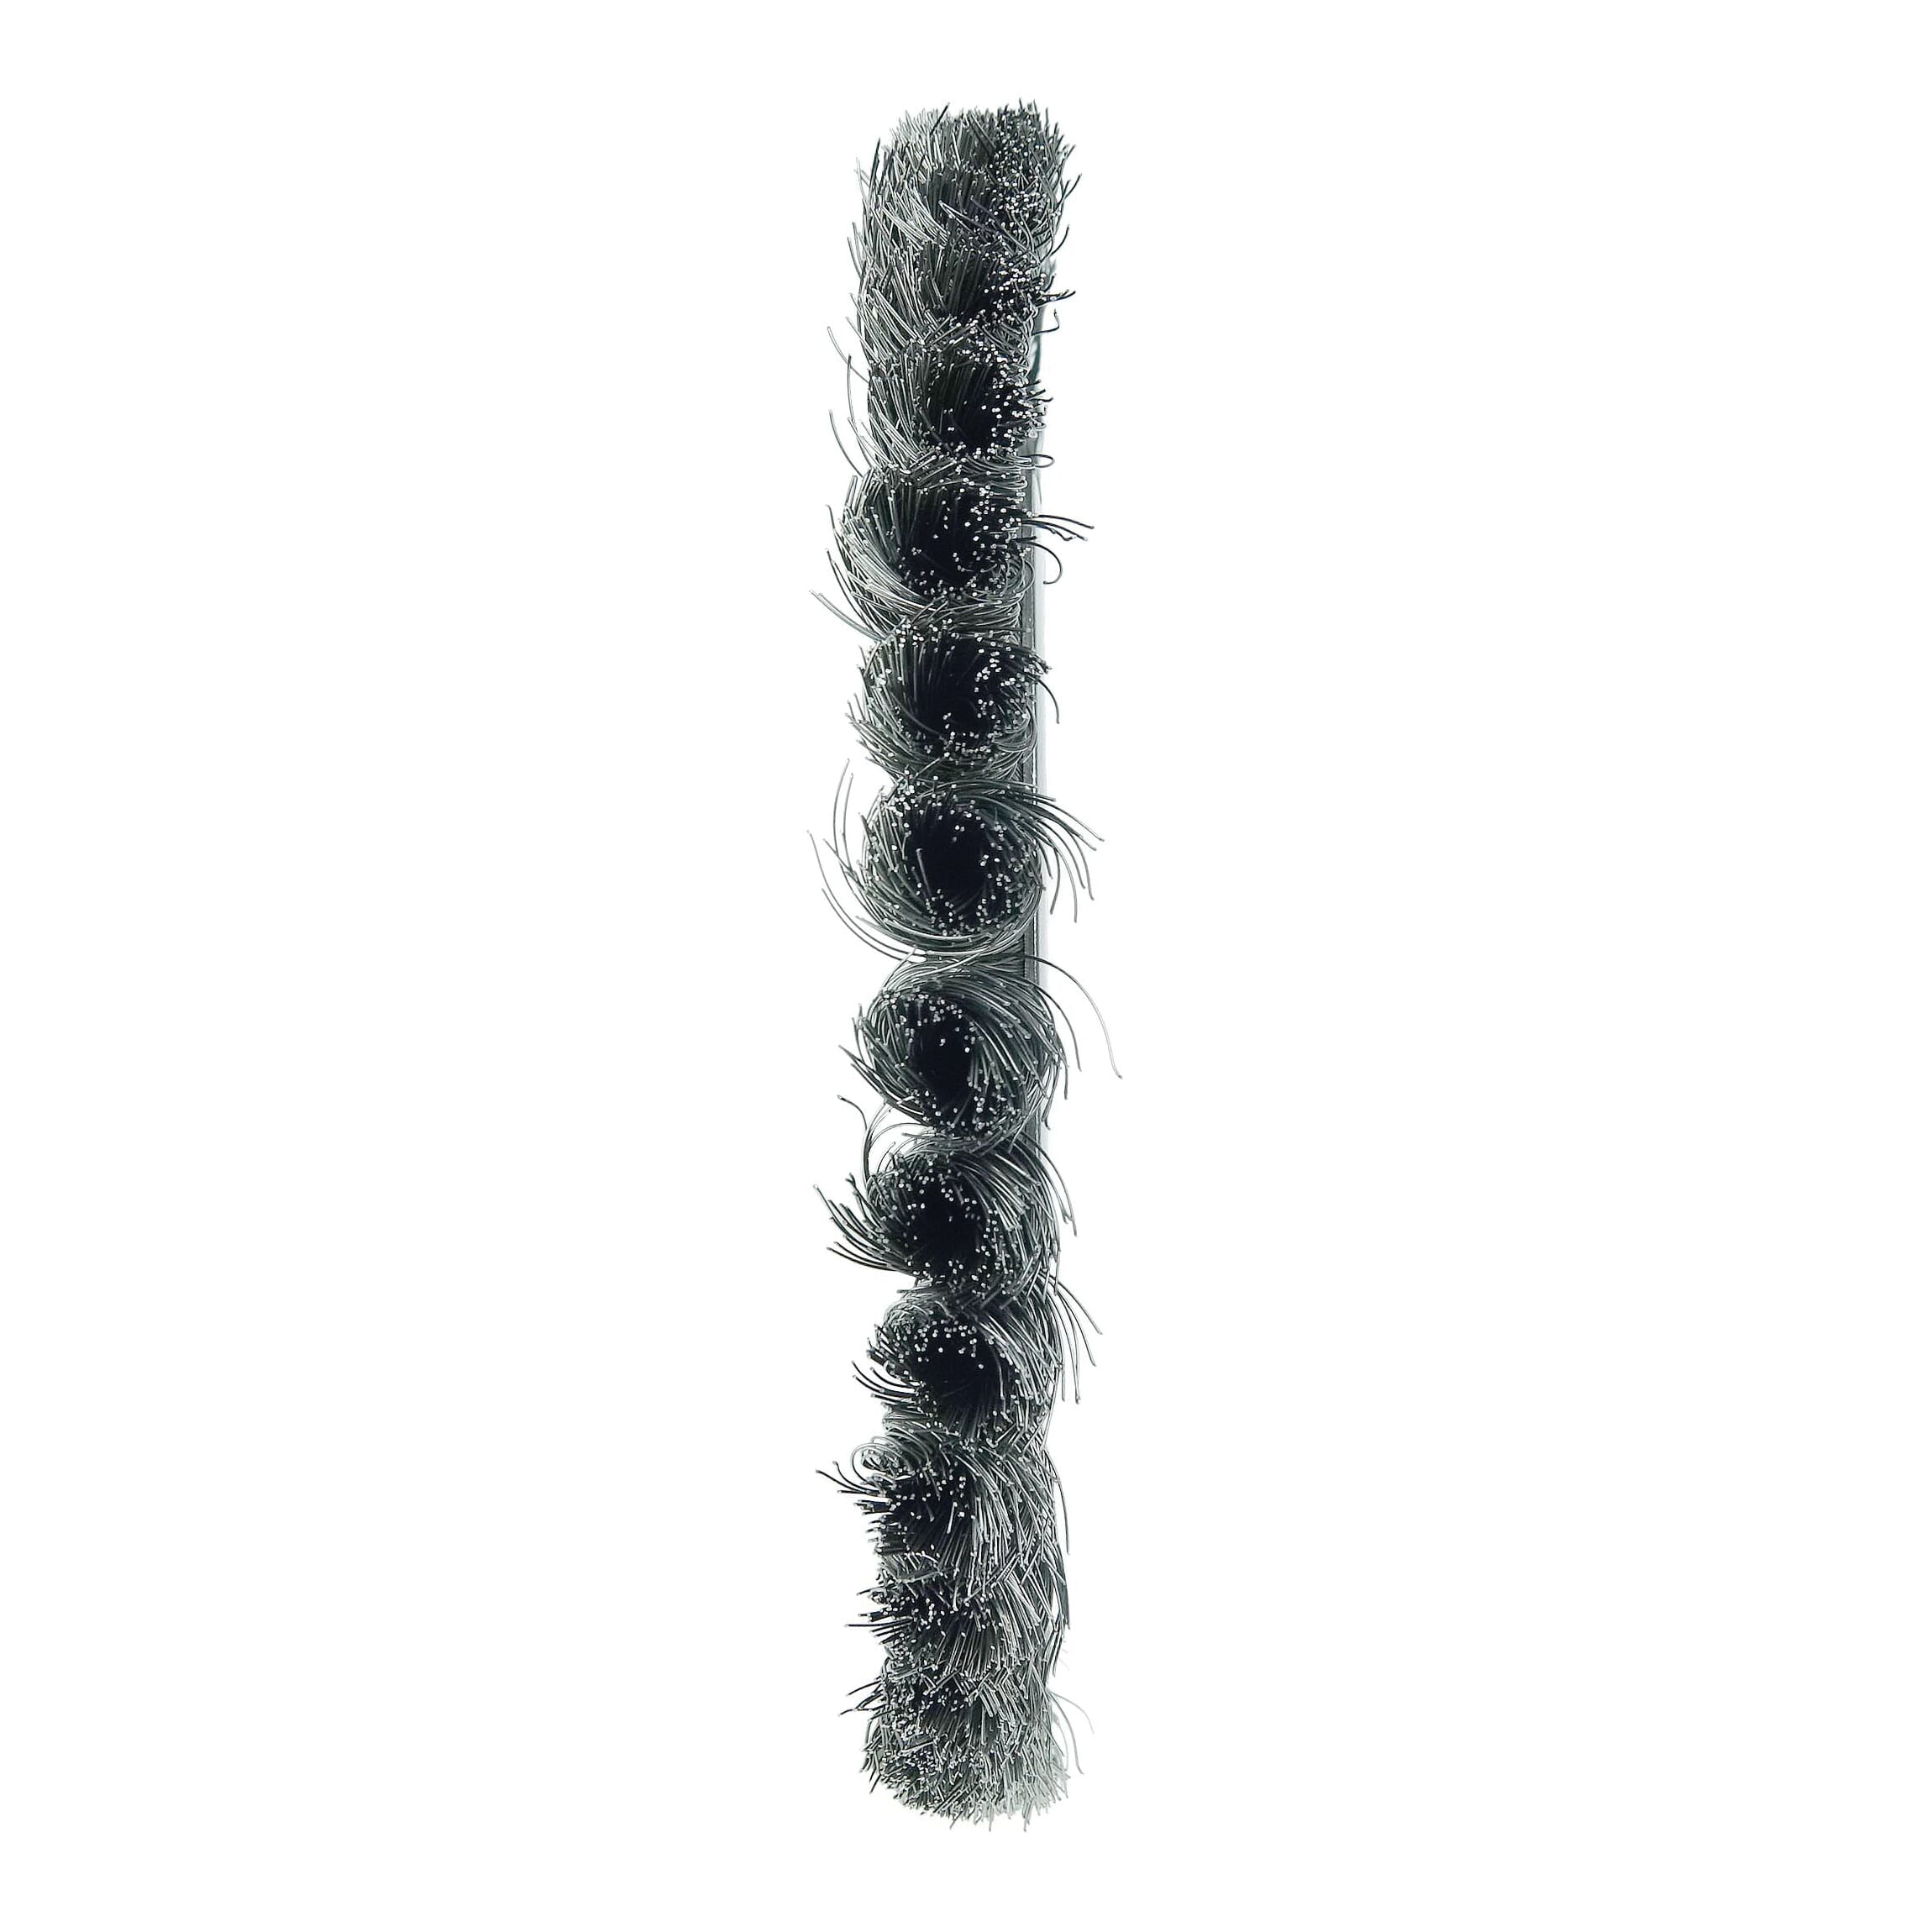 Weiler® 08138 Wheel Brush, 8 in Dia Brush, 5/8 in W Face, 0.014 in Dia Standard/Twist Knot Filament/Wire, 3/4 in Arbor Hole